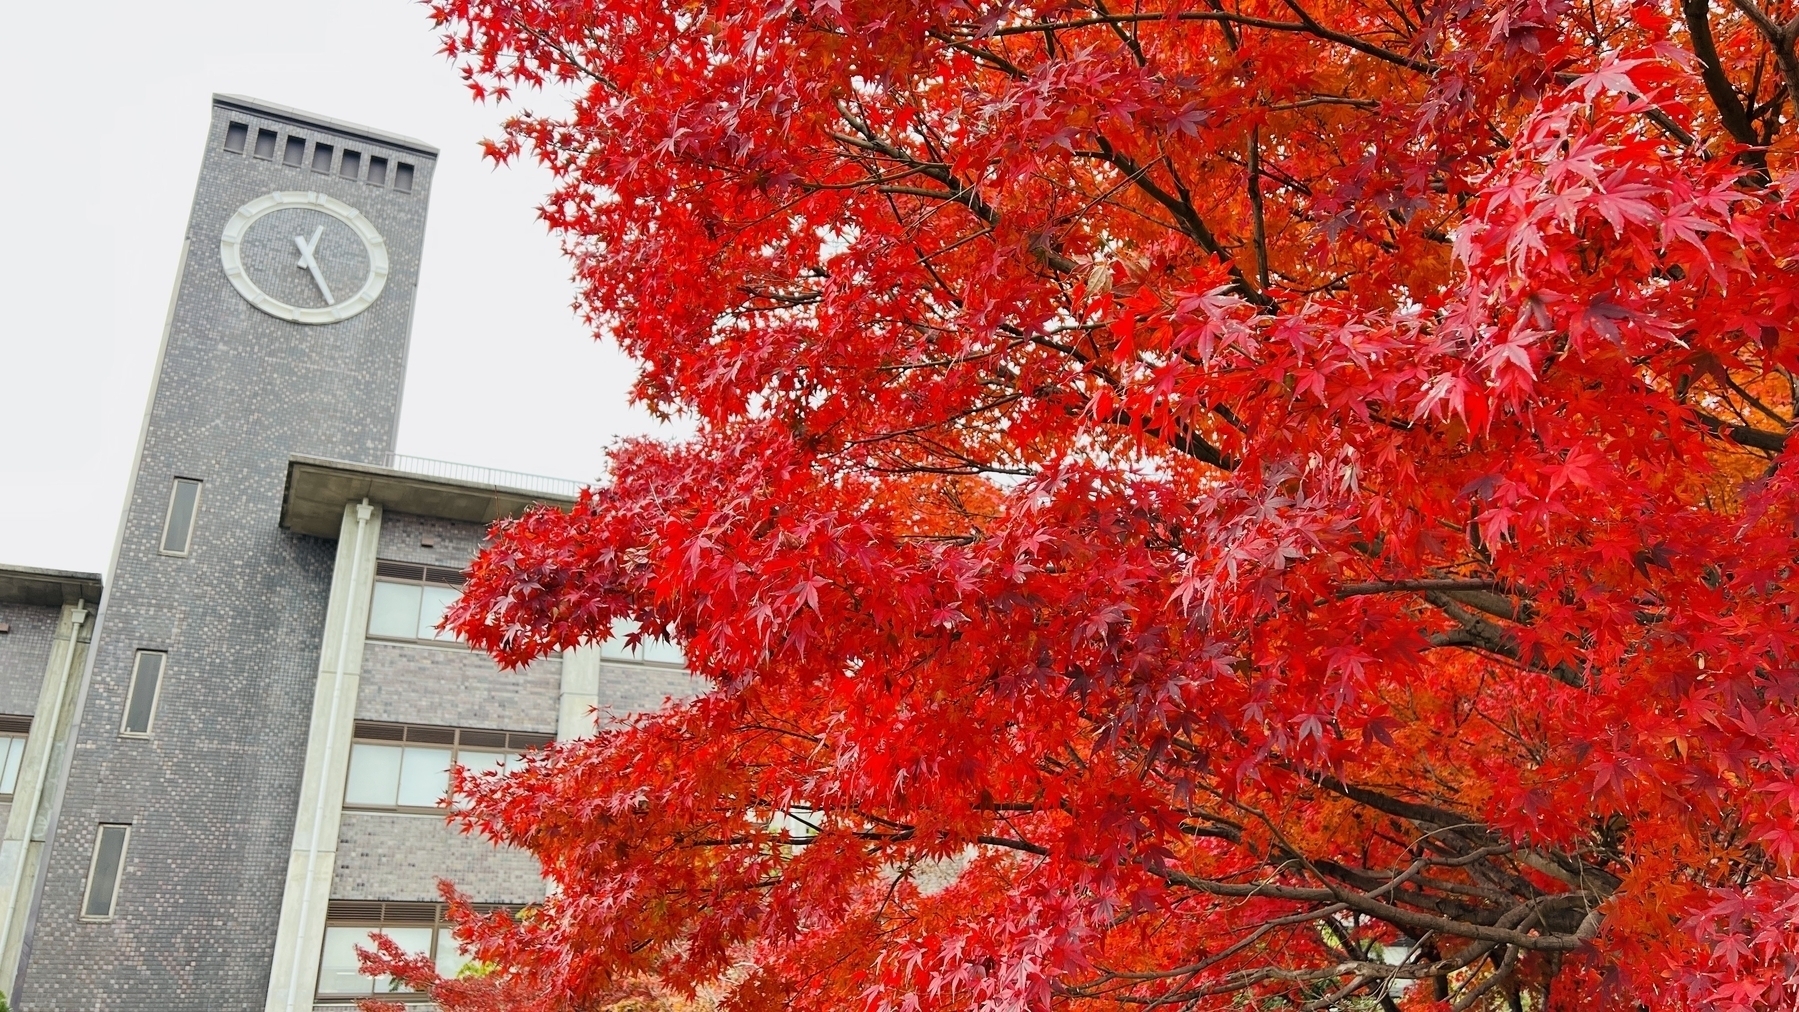 Red leaves of an autumn maple tree in the foreground and a clock tower in the background